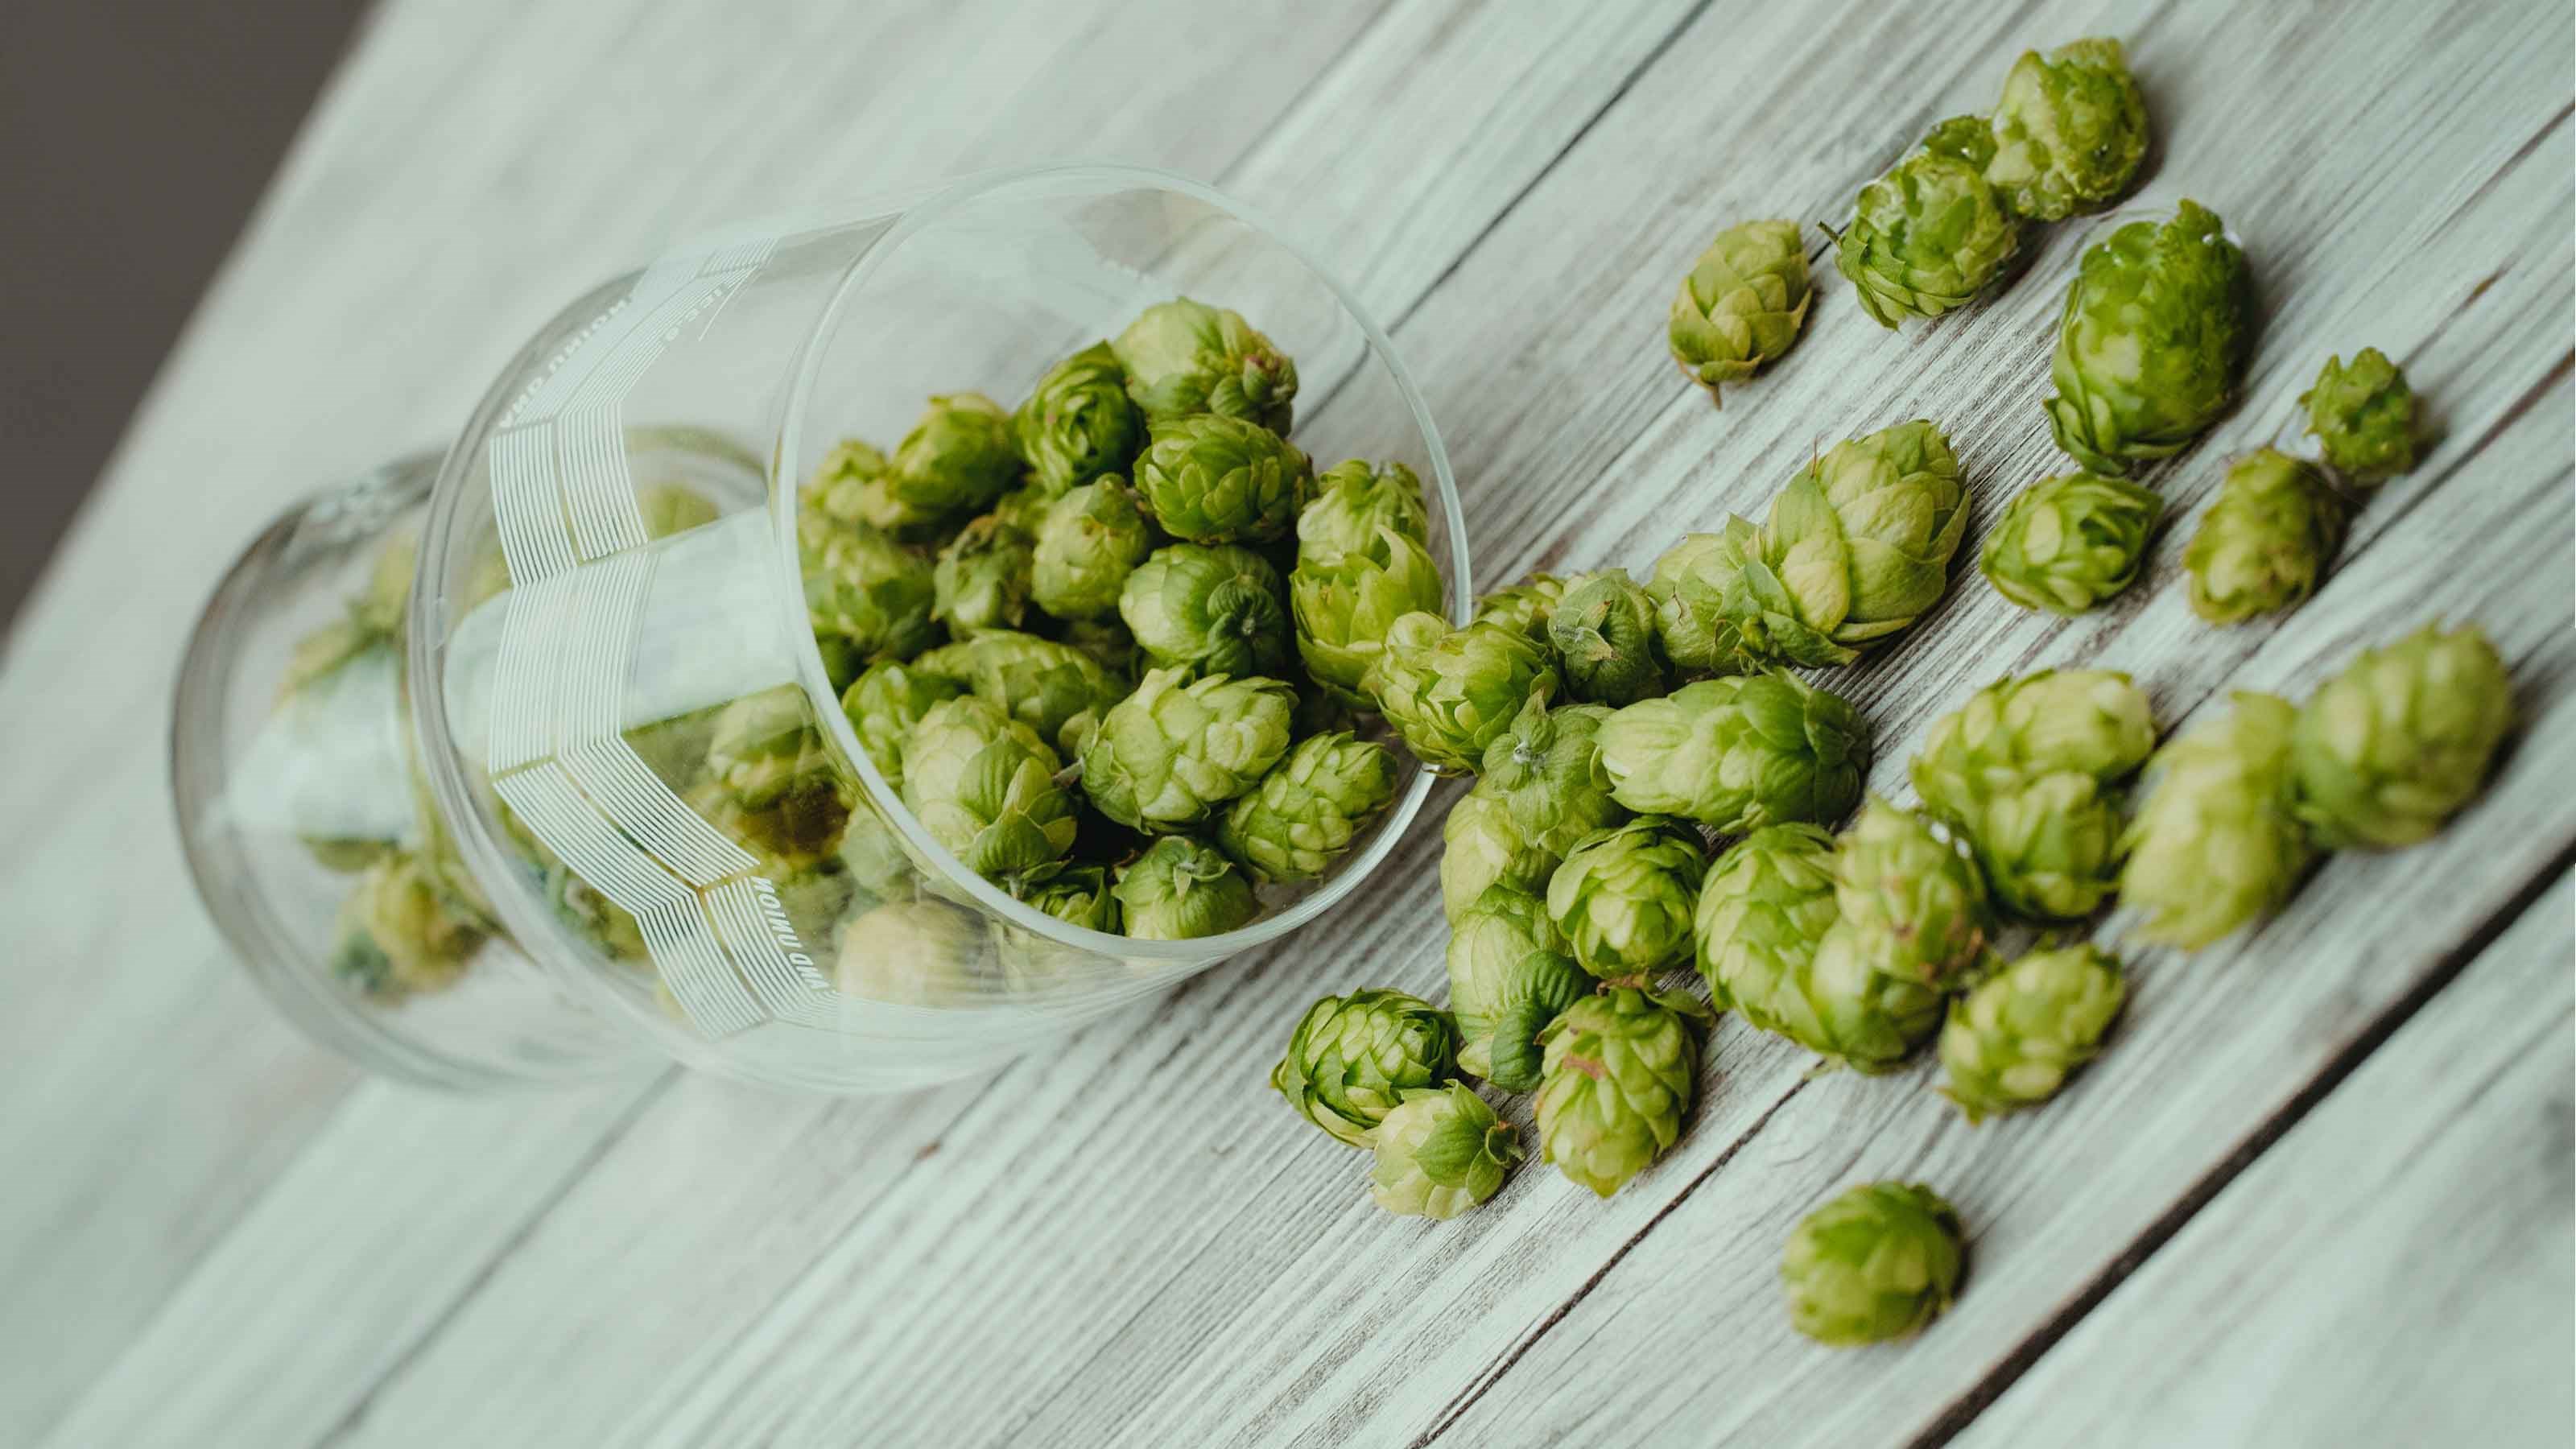 Whole cone hops spilling out of a glass, ready to be used to make hop water.